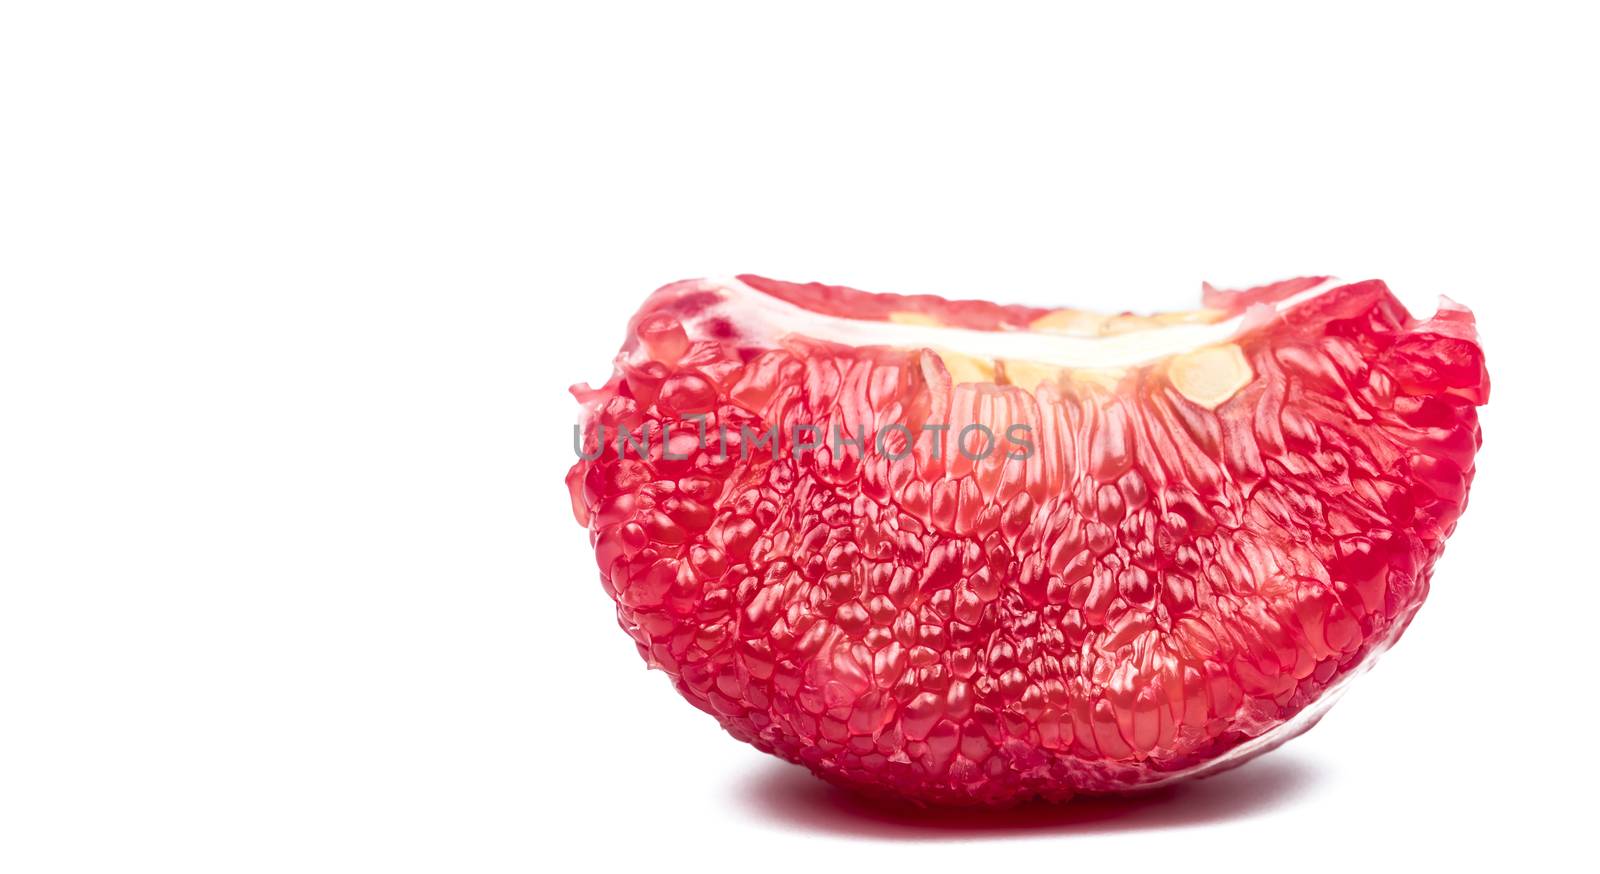 Red pomelo pulp with seeds isolated on white background with clipping path. Thailand Siam ruby pomelo fruit. Natural source of vitamin C (antioxidants) and potassium. Healthy food for slow down aging by Fahroni